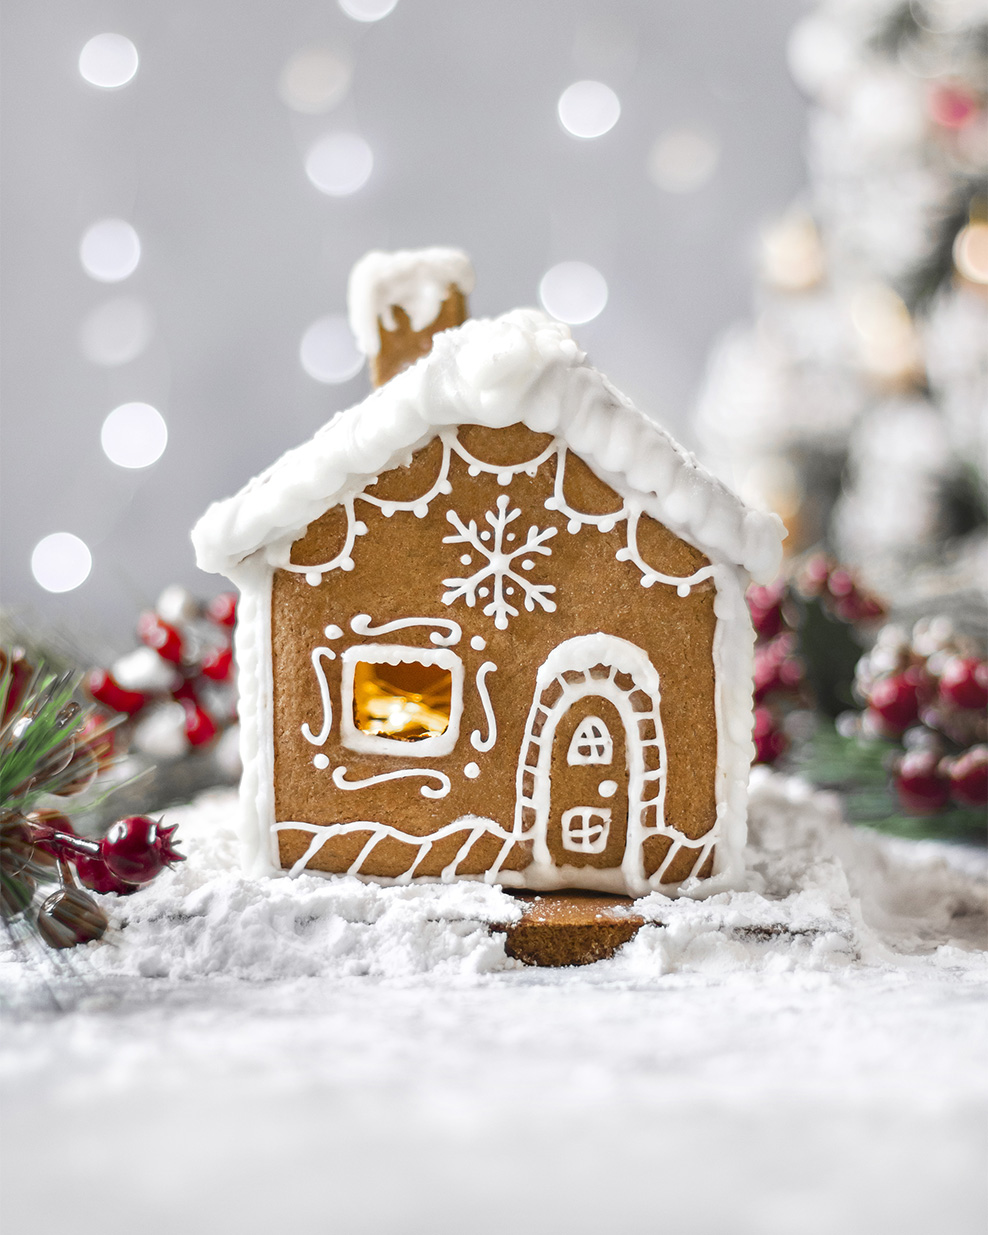 Gingerbread House Recipe From Scratch